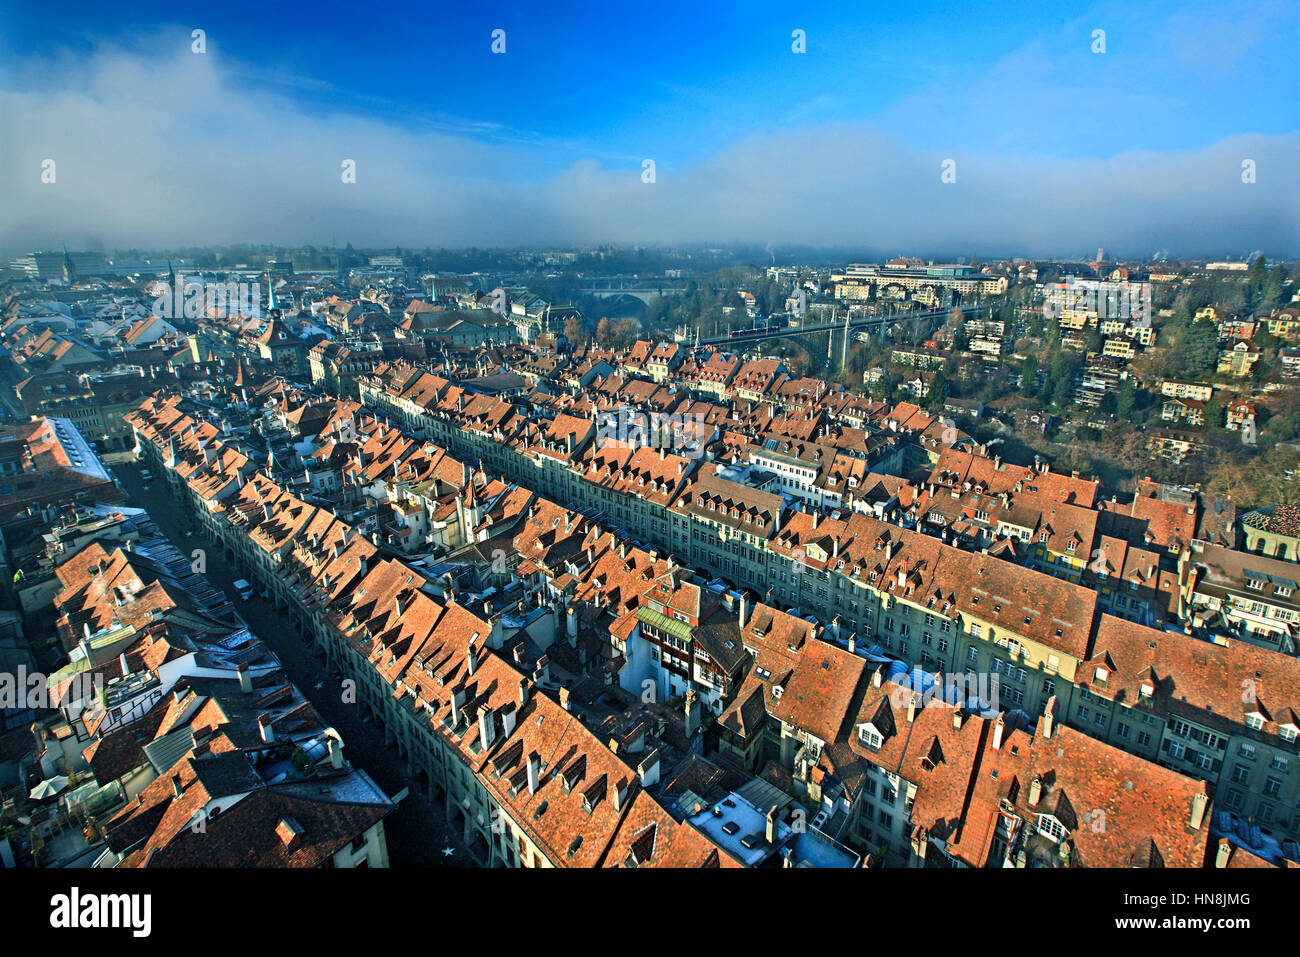 View of the rooftops of the Old Town (Altstadt) of Bern from the bell tower of the Münster (Cathedral). Switzerland. Stock Photo